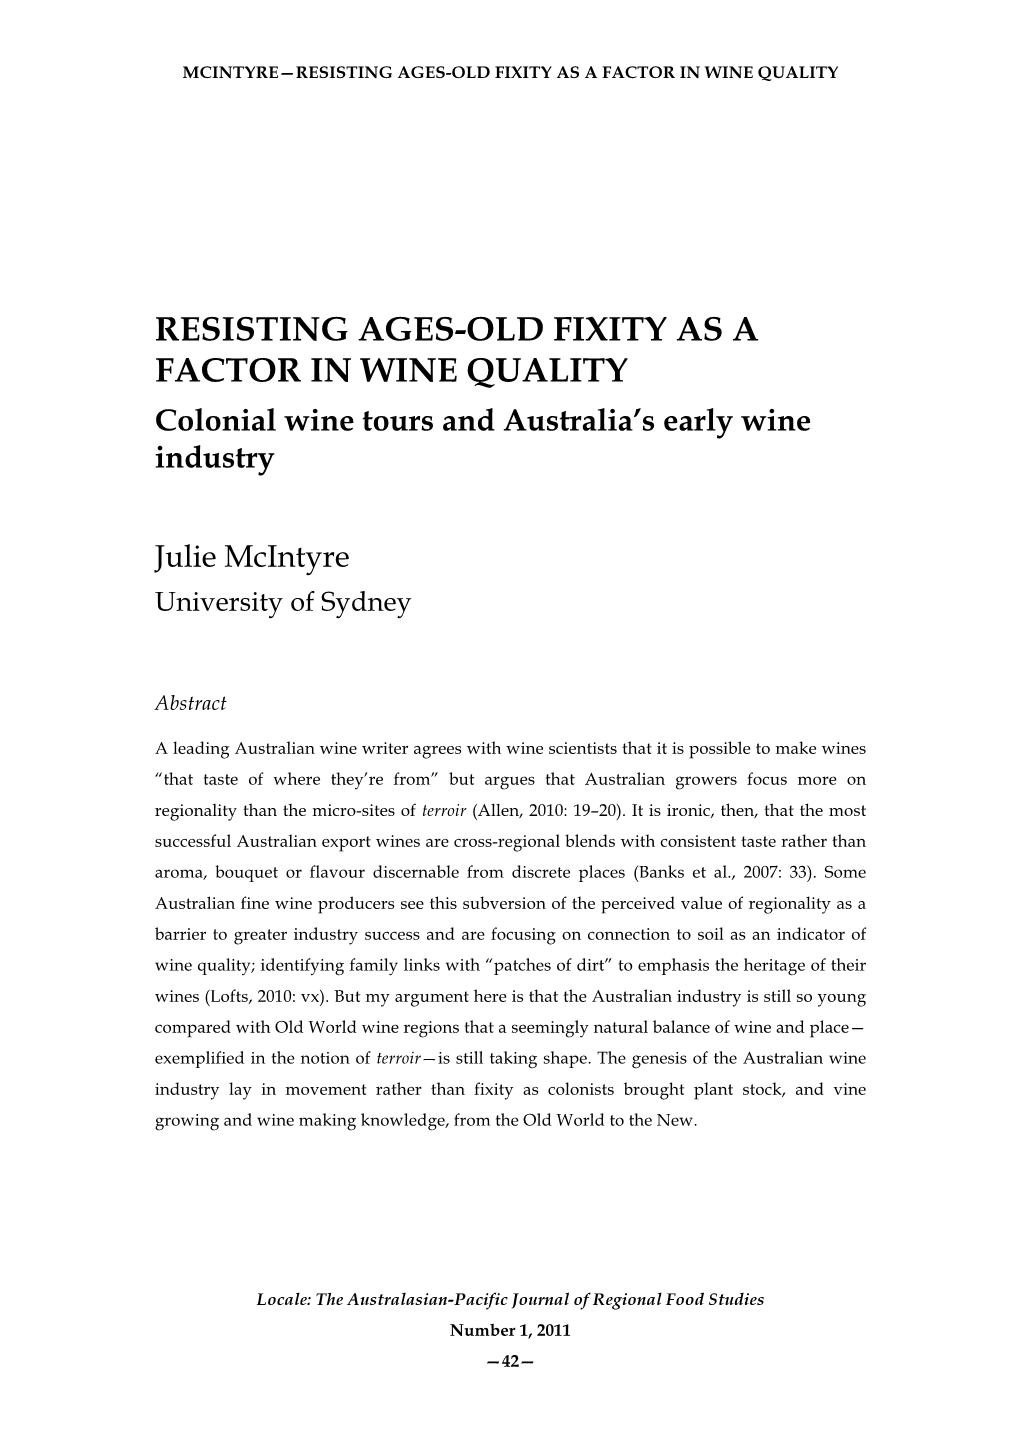 Resisting Ages-Old Fixity As a Factor in Wine Quality